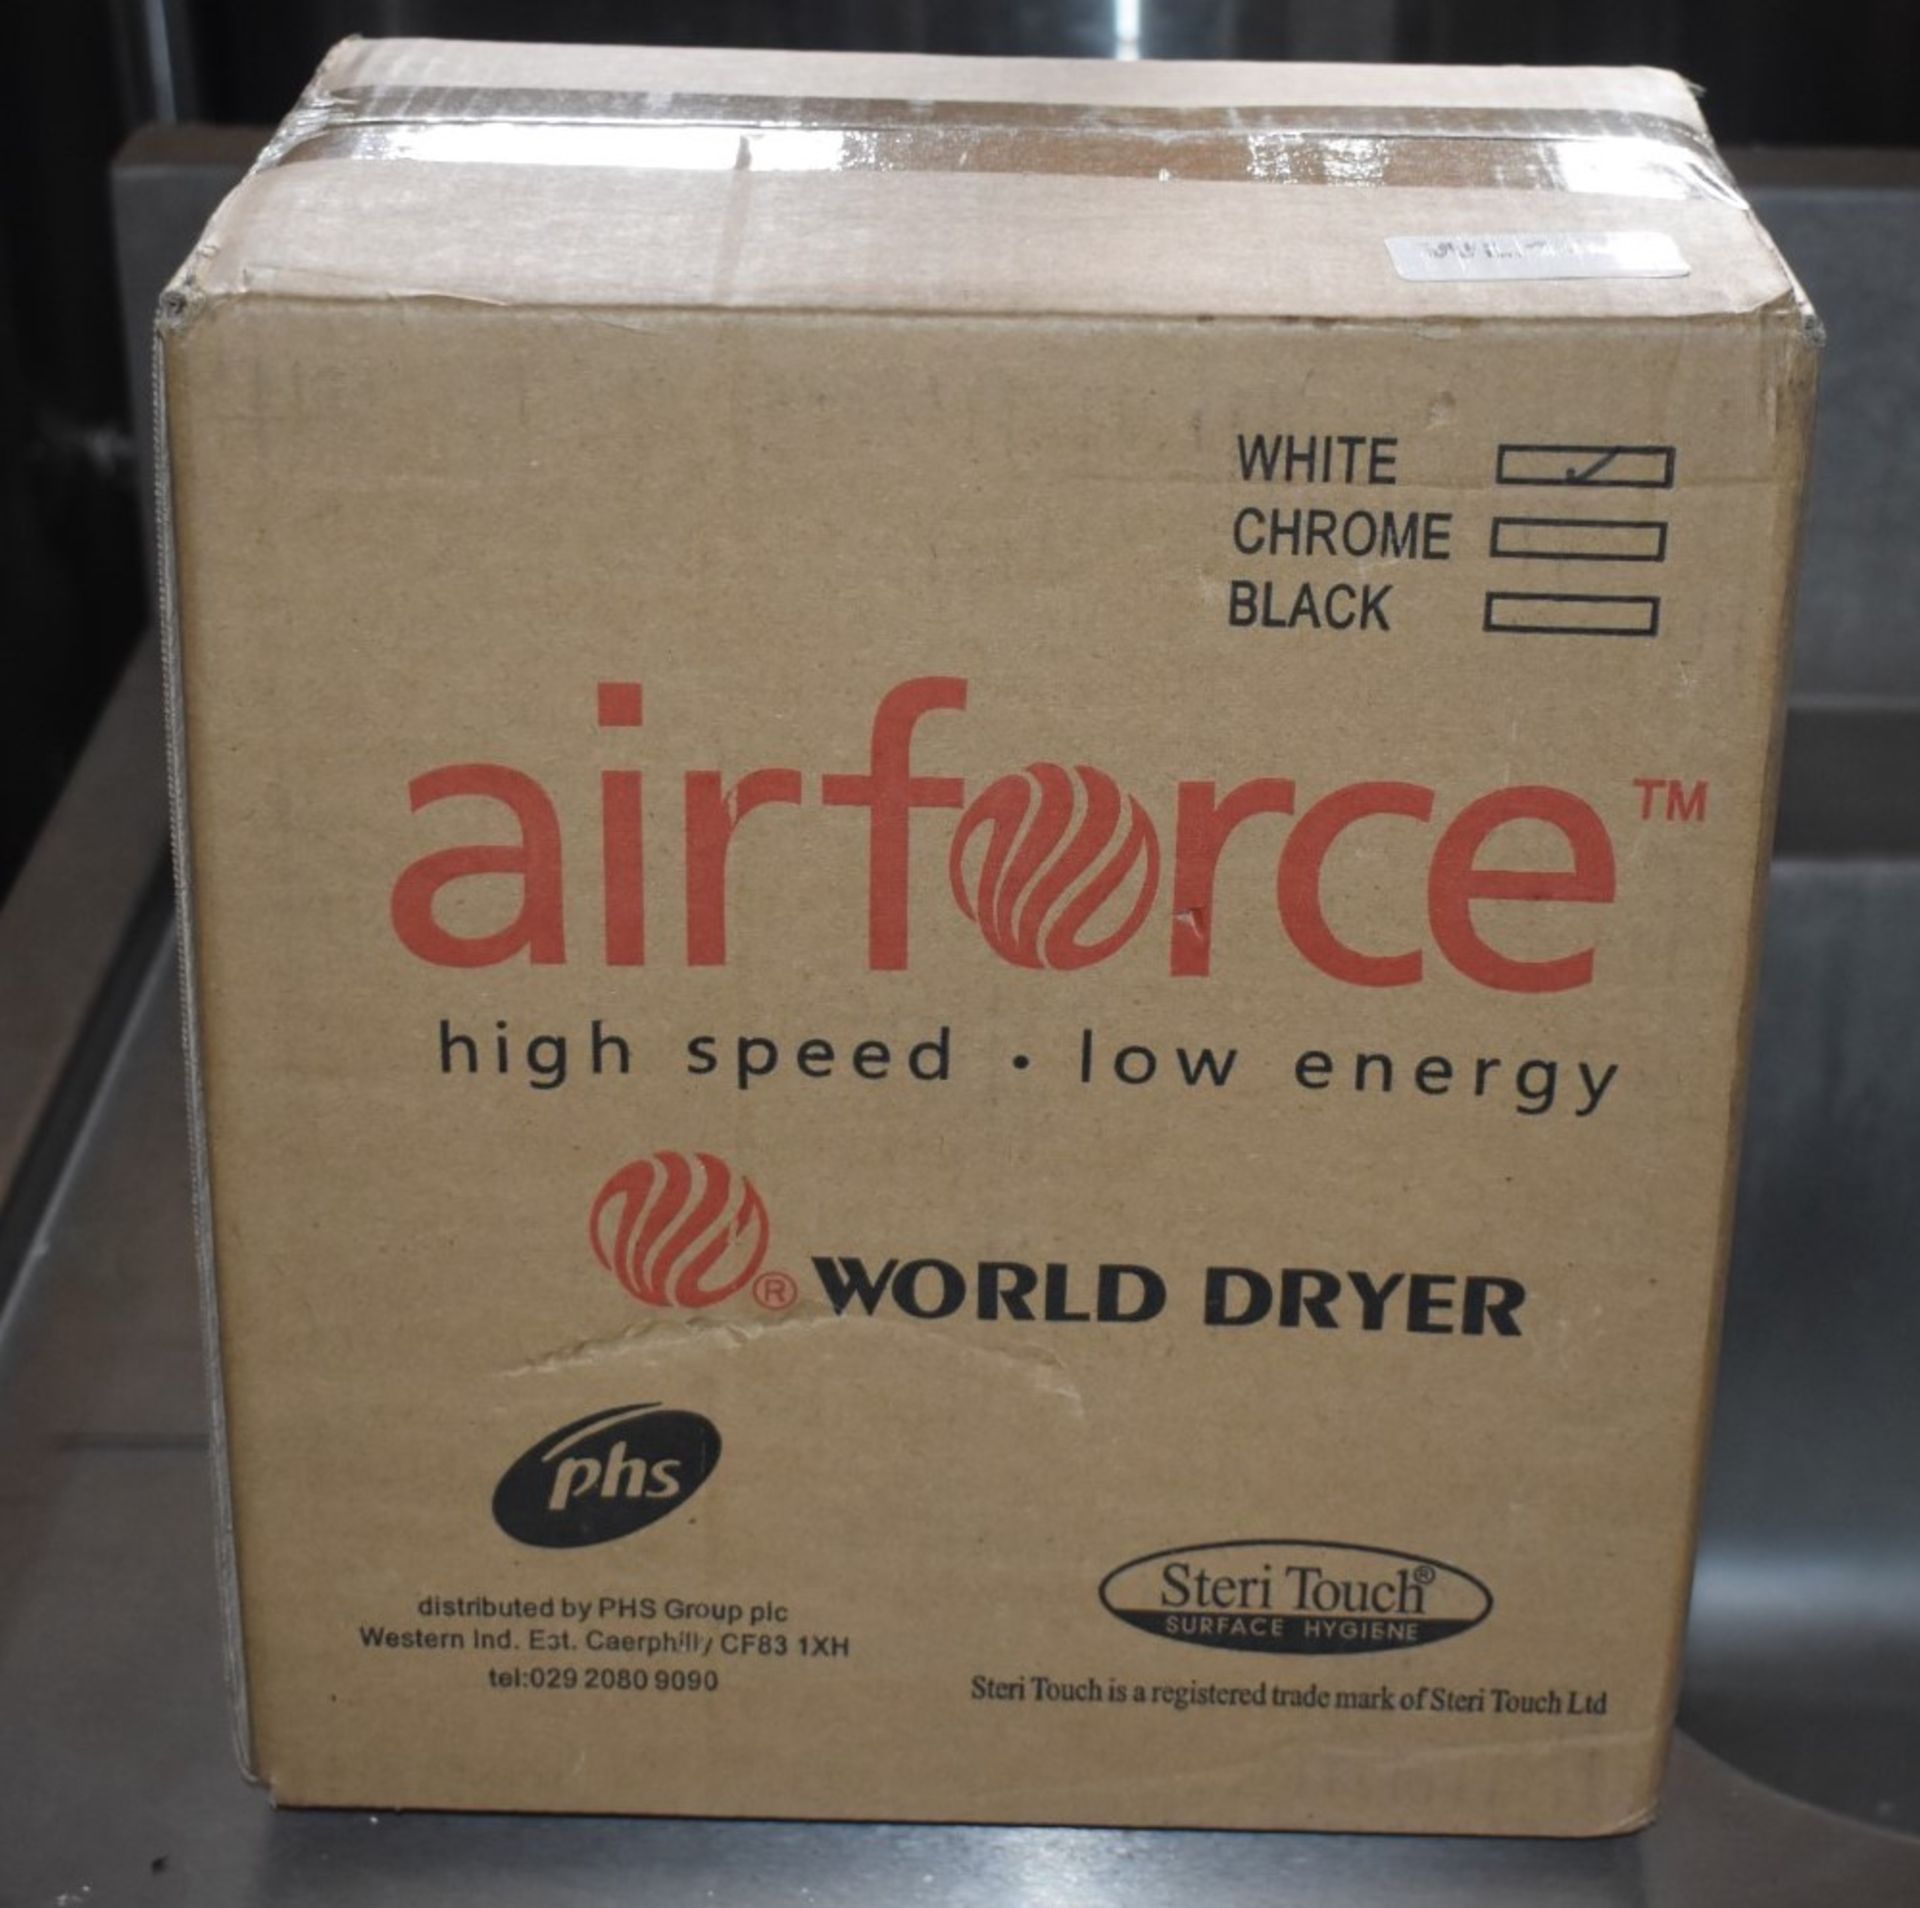 1 x Air Force High Speed Low Energy Electric Hand Dryer - Mode J48-974W3 - Brand New and Boxed - - Image 5 of 7